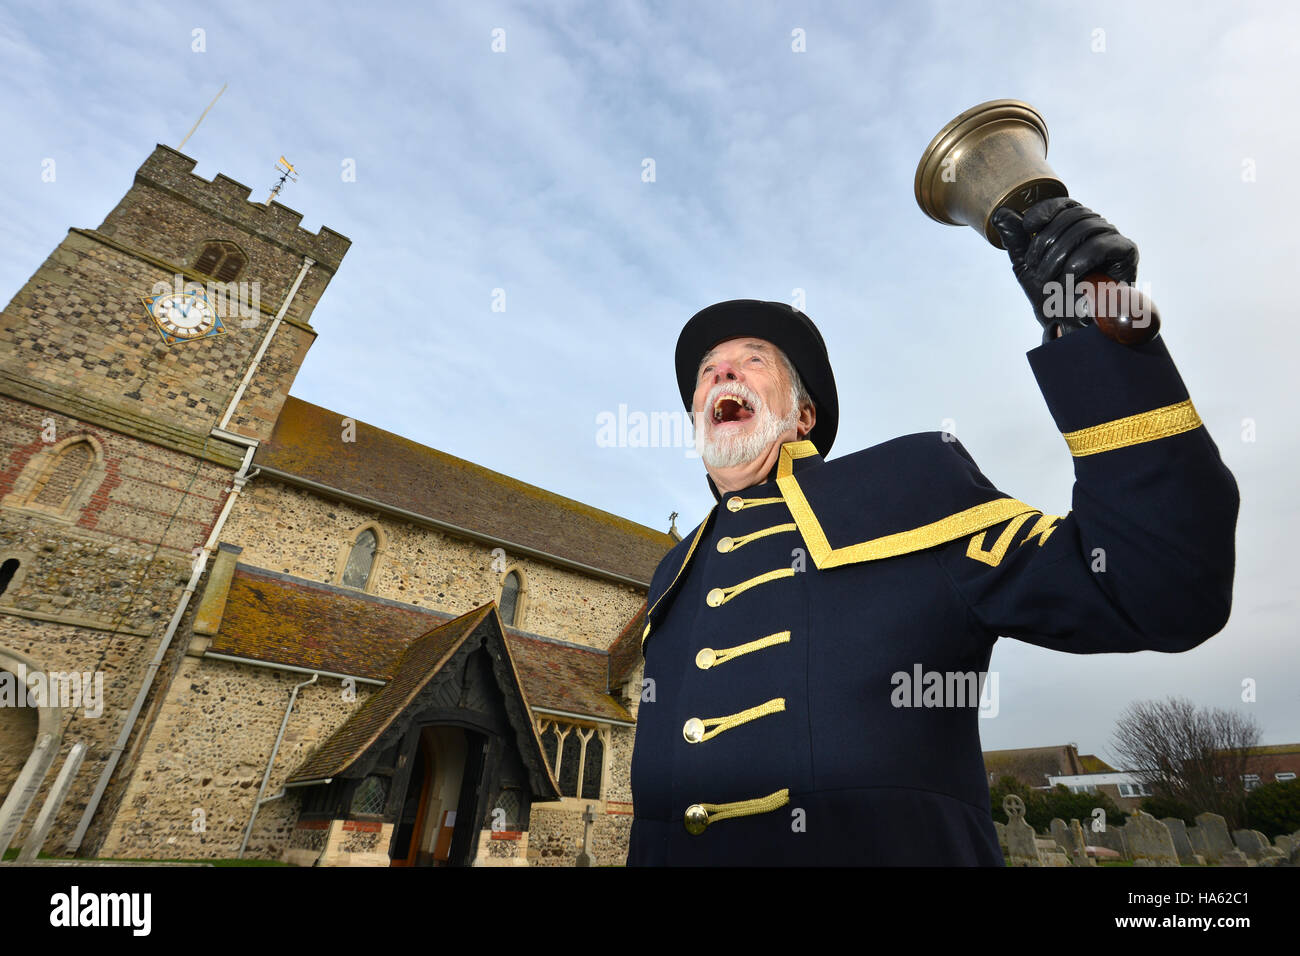 Town crier at work - Peter White from Seaford, been a crier for 40 years Stock Photo